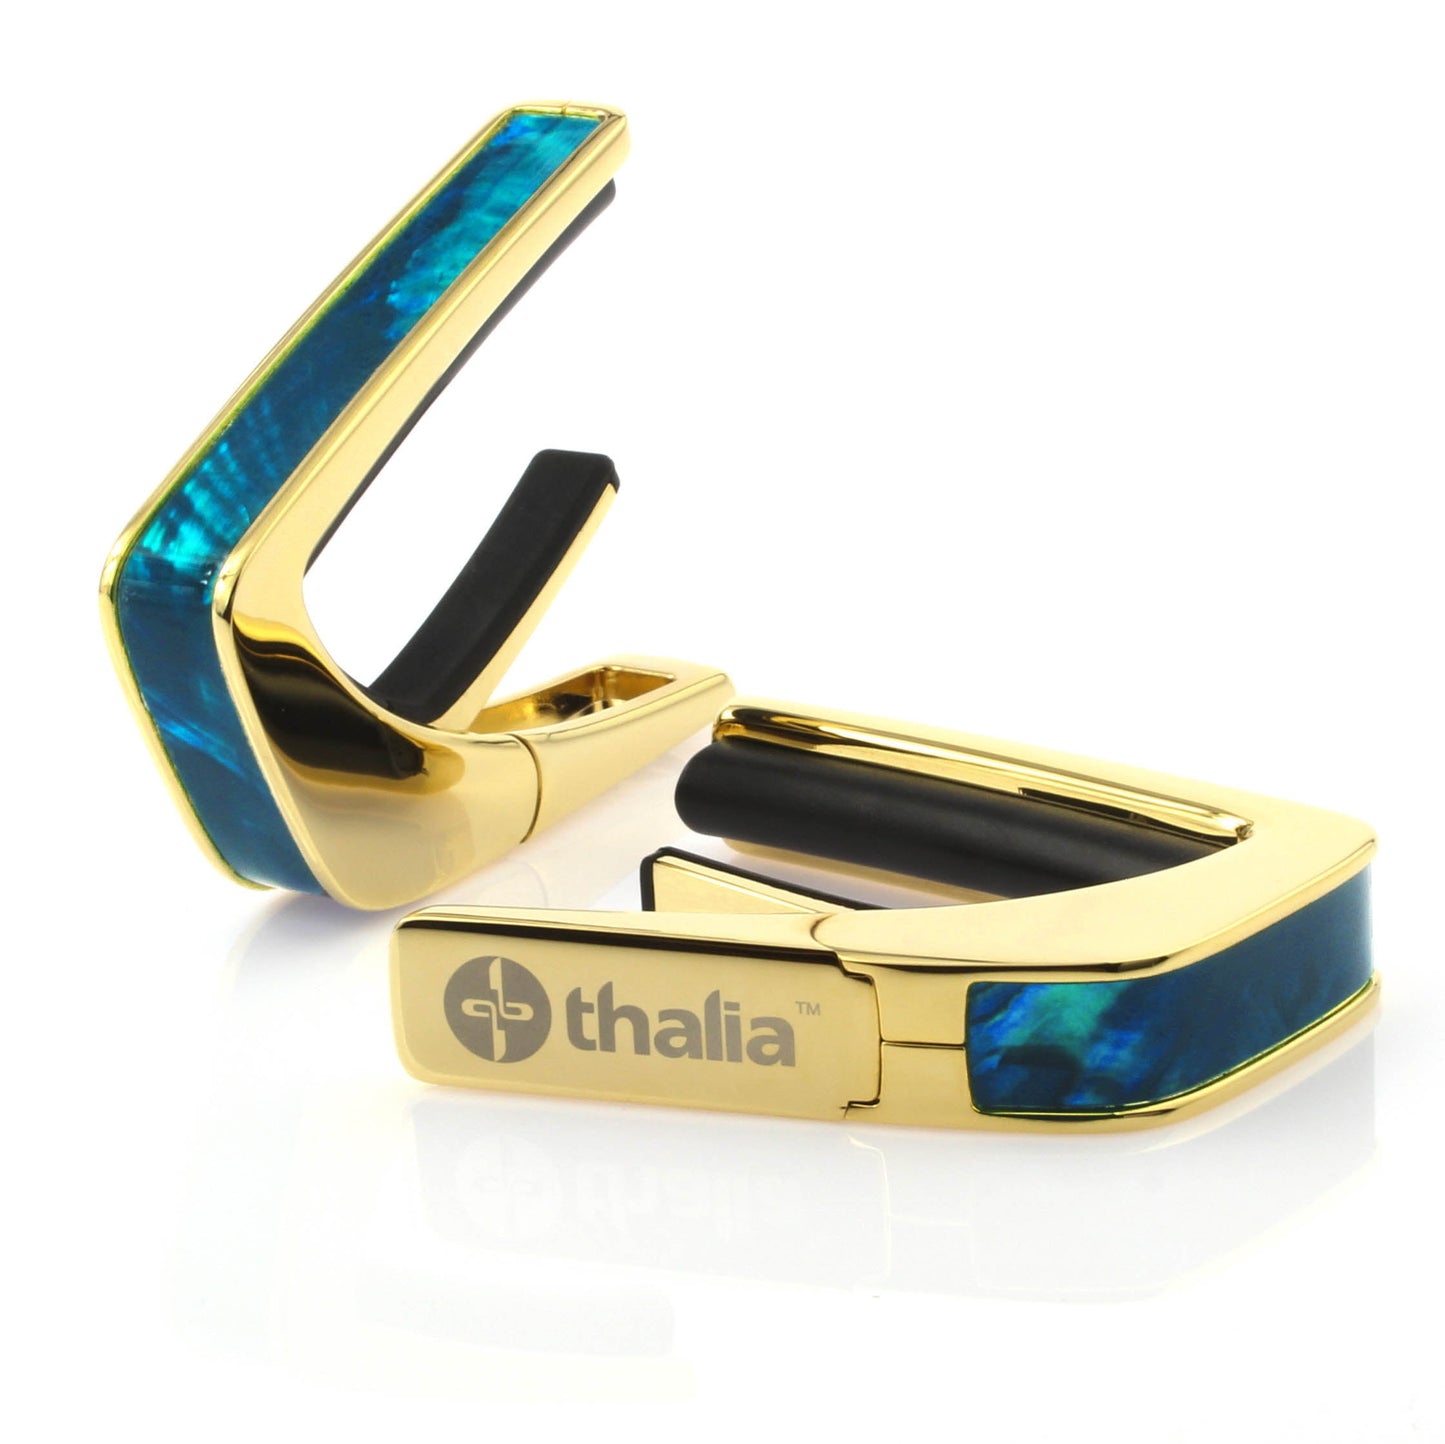 Thalia Exotic Series Shell Collection Capo ~ Gold with Teal Angel Wing Inlay